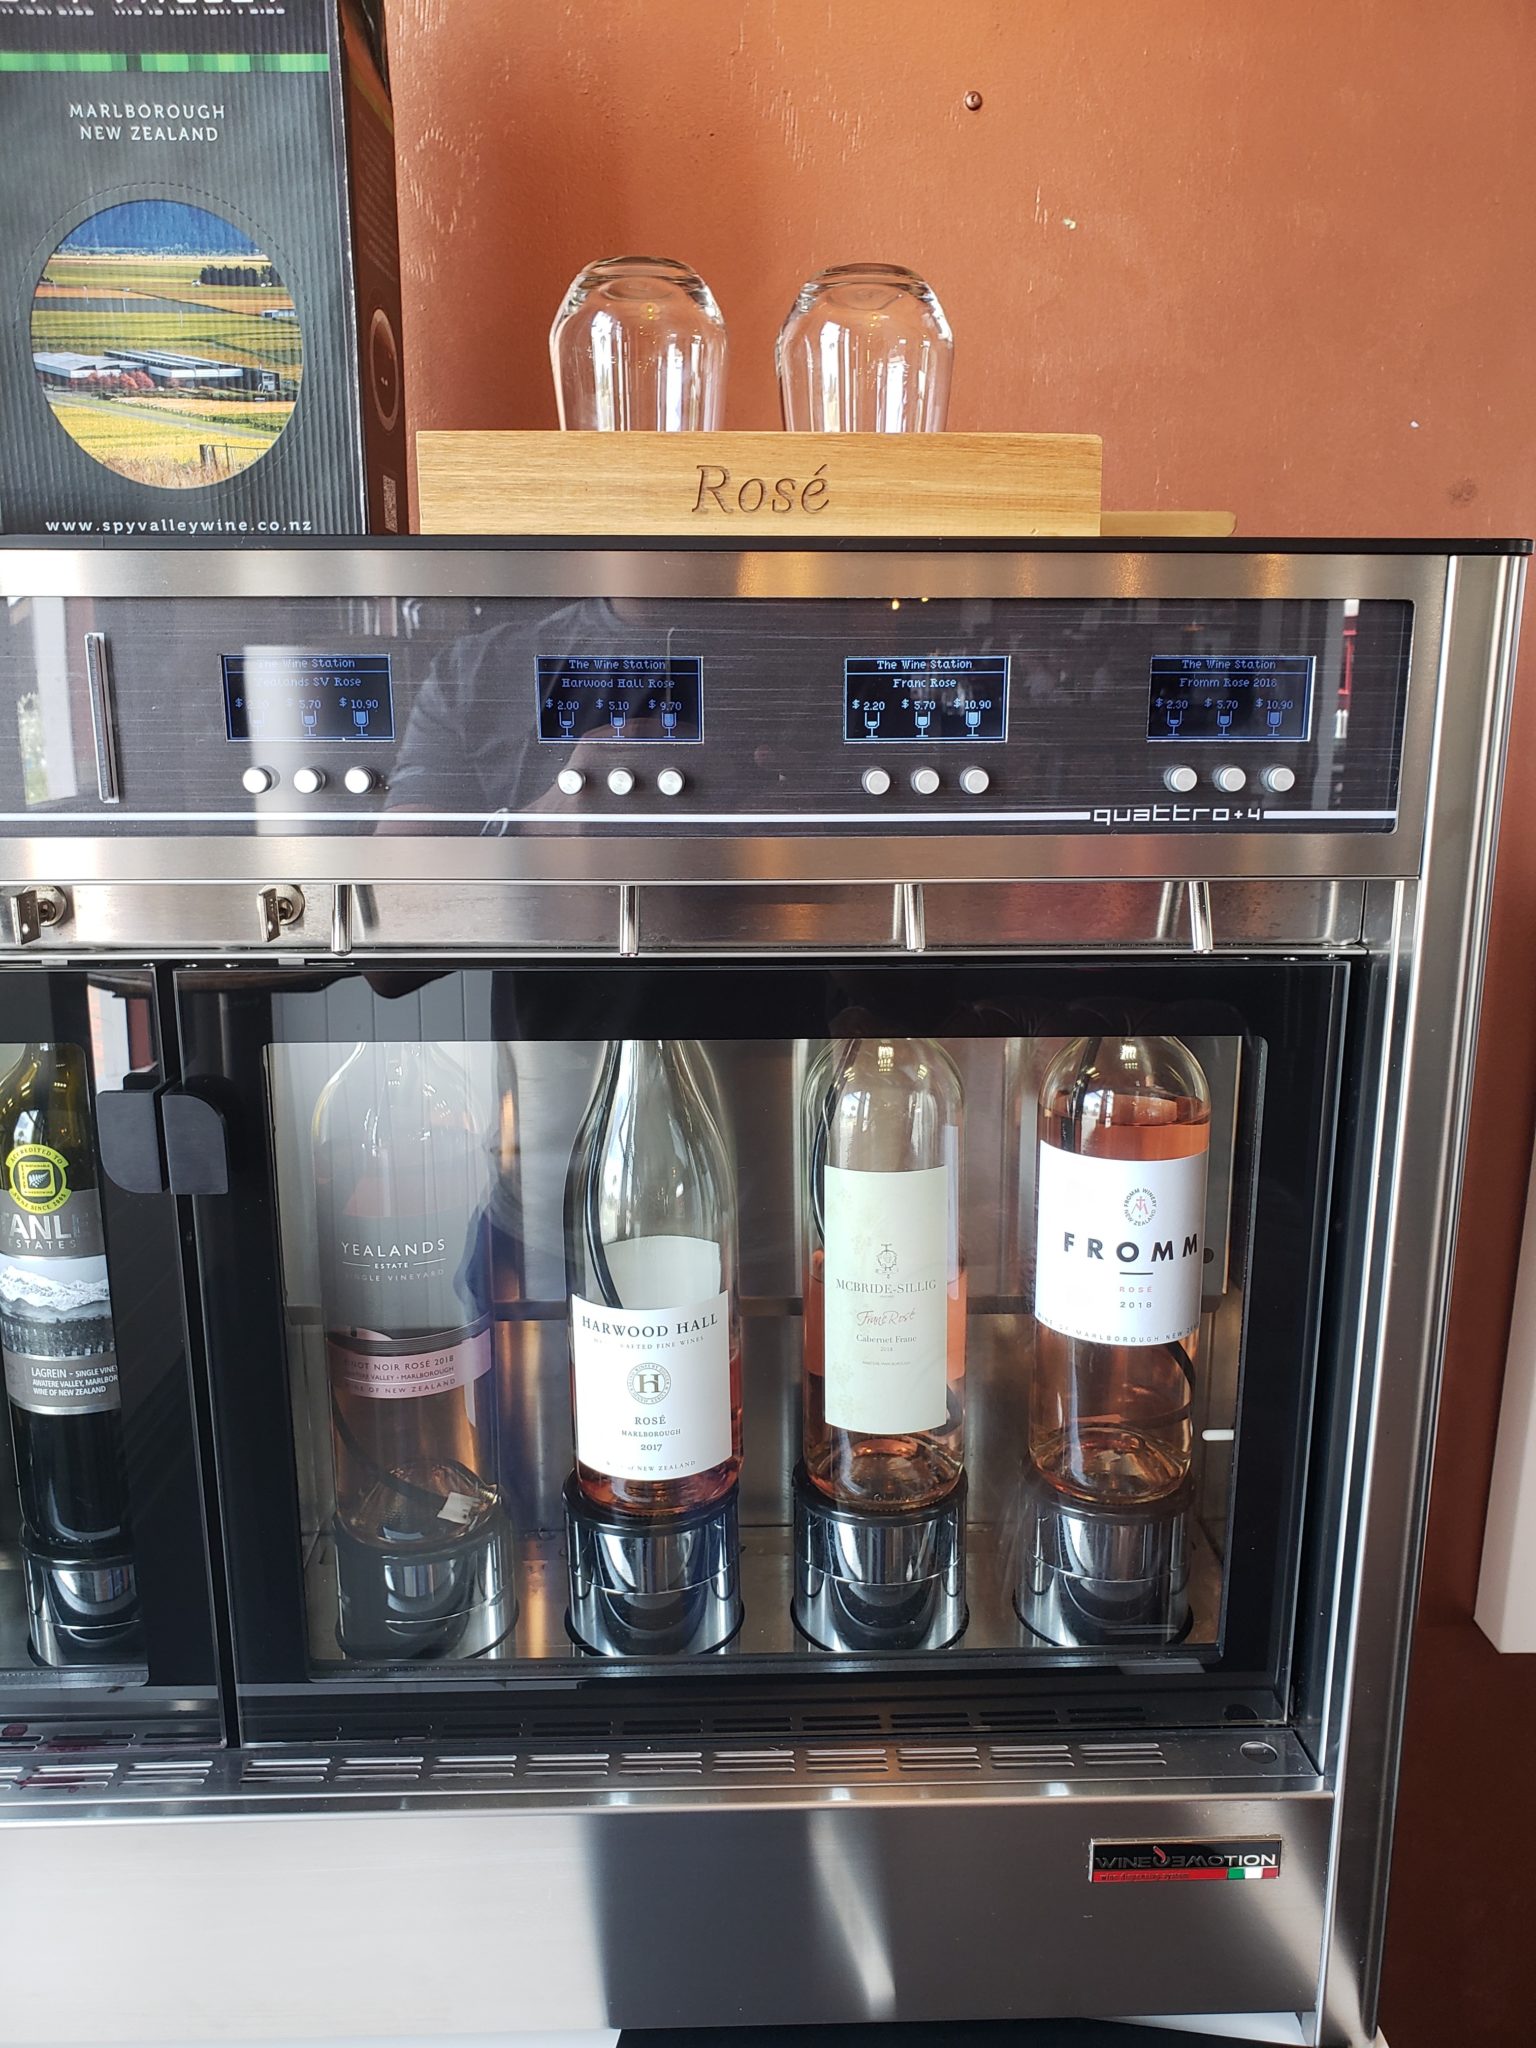 a wine cooler with bottles and glasses